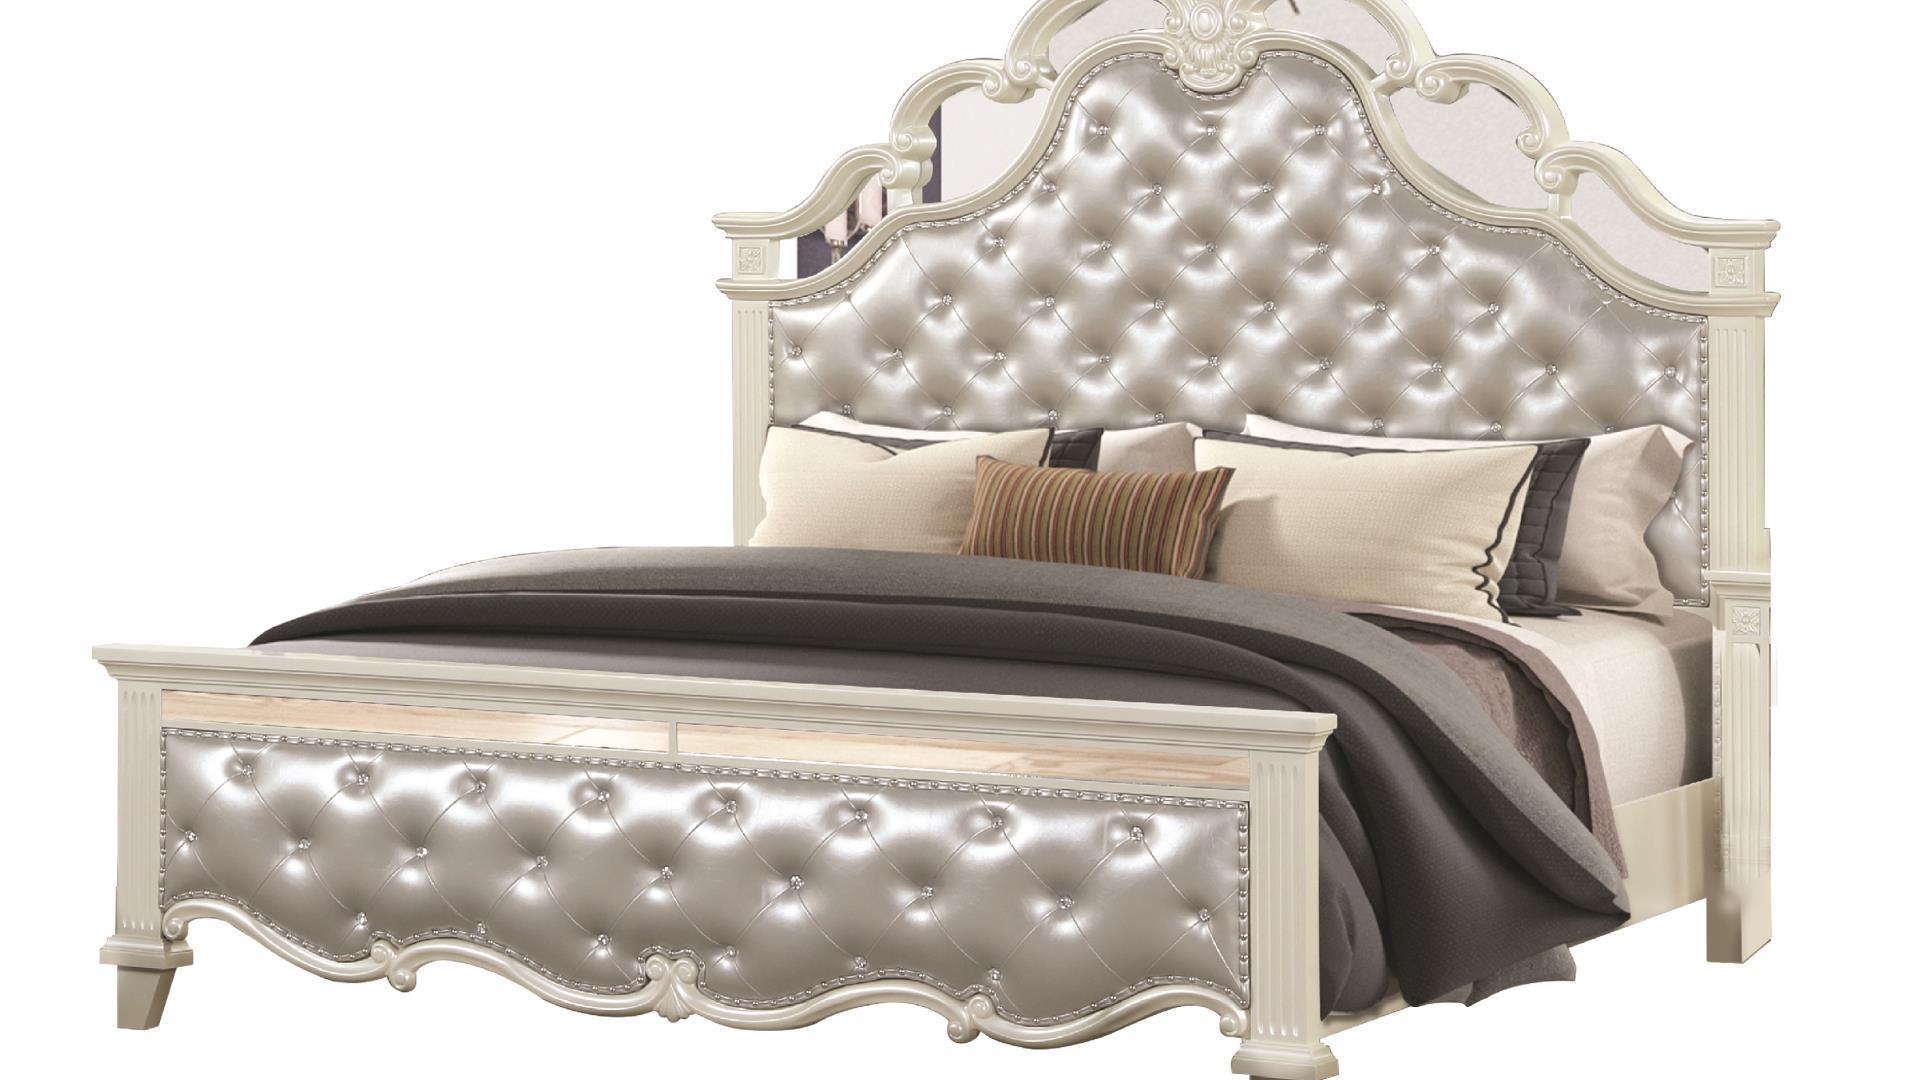 

    
Milky White Tufted King Bed MILAN Galaxy Home Contemporary Modern
